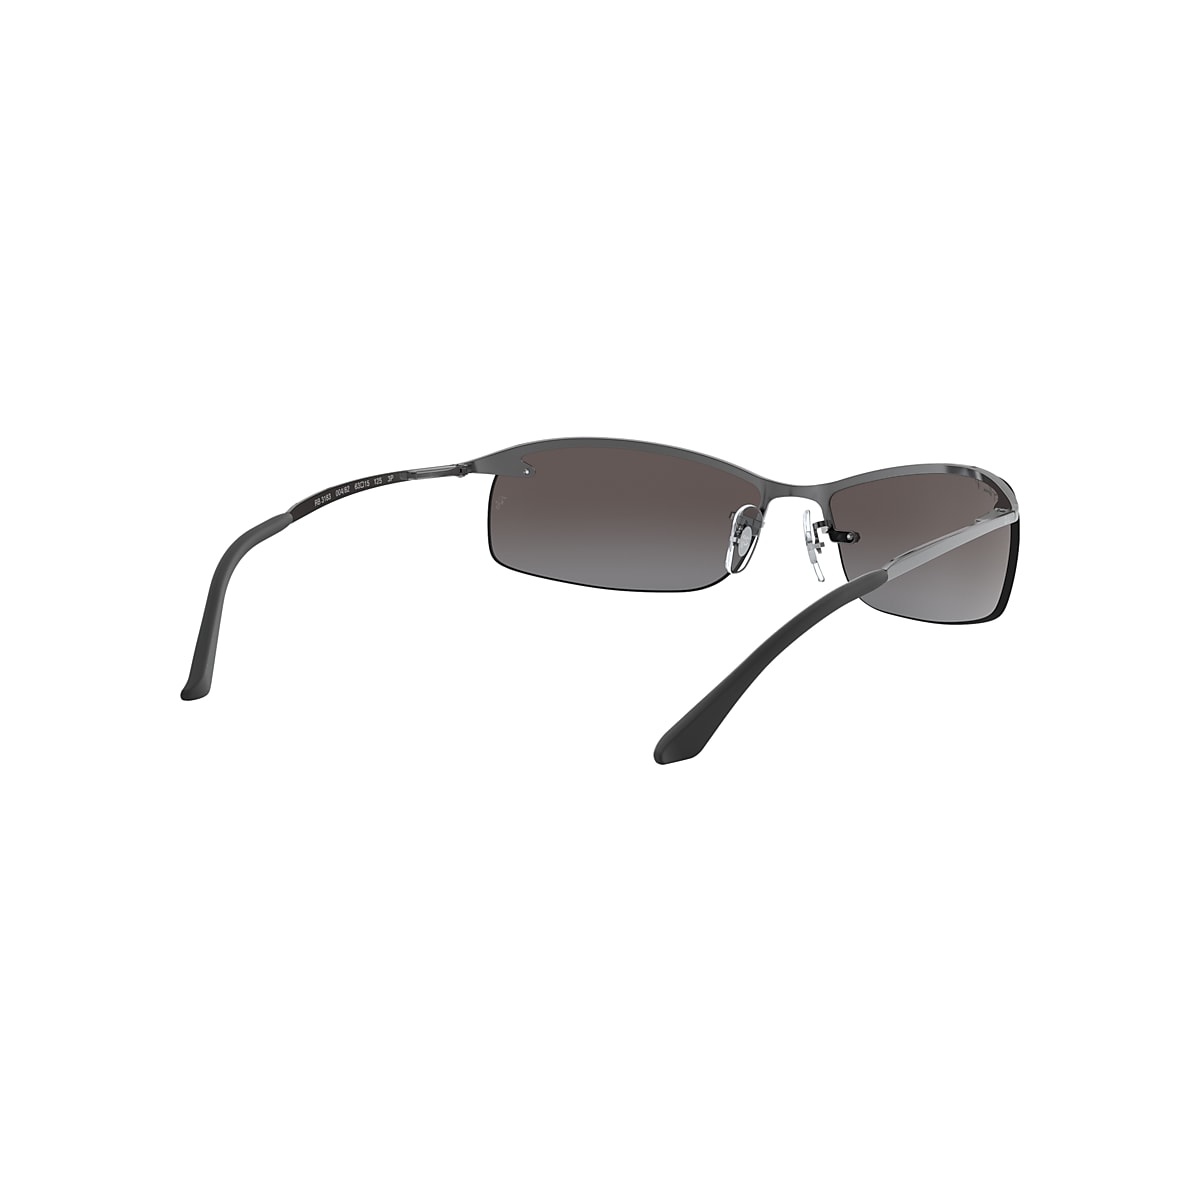 RB3183 Sunglasses in Gunmetal and Silver - RB3183 | Ray-Ban® US